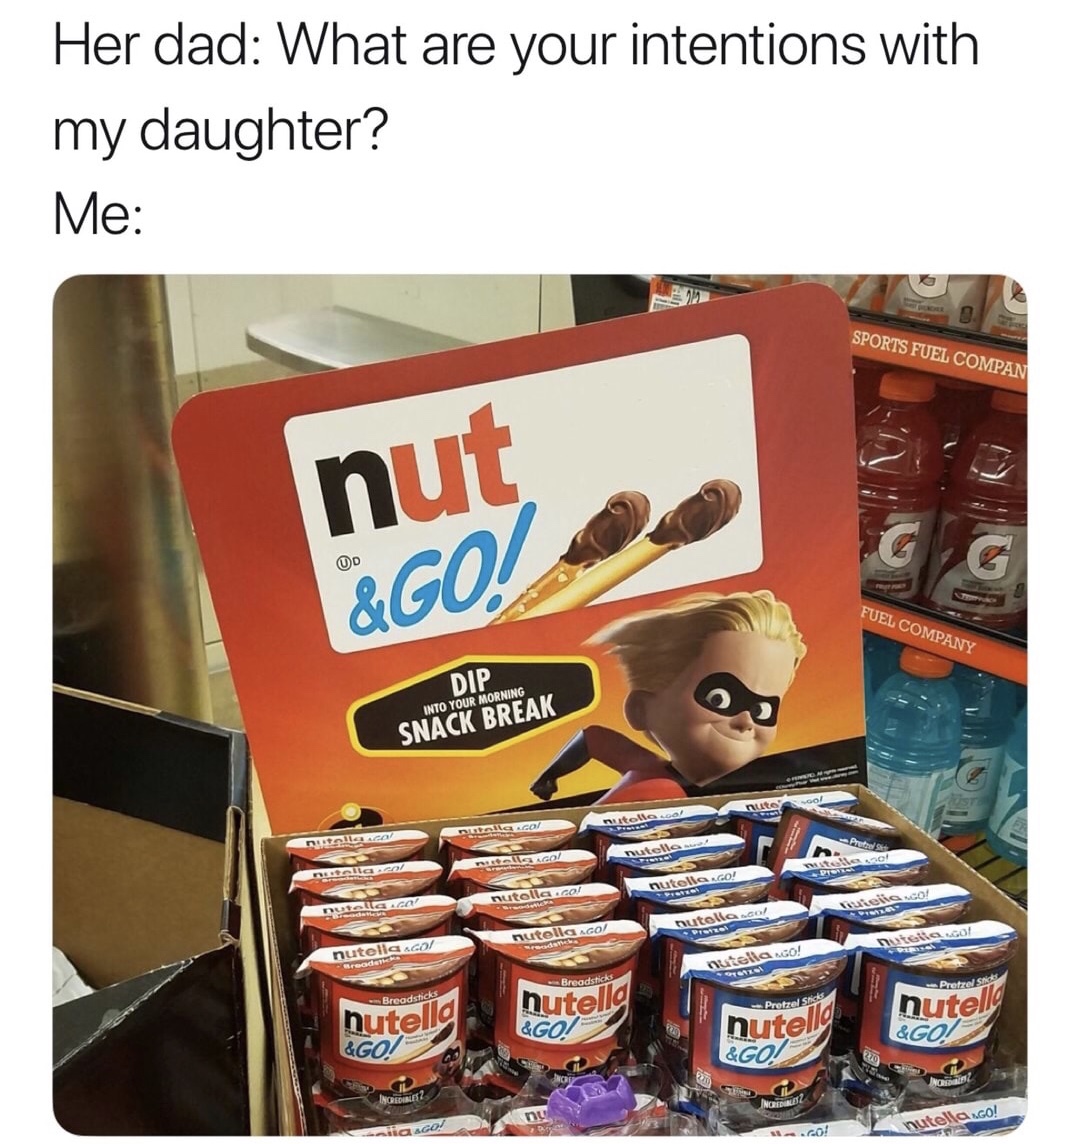 nutella nut and go - Her dad What are your intentions with my daughter? Me Sports Fuel Compan nut &Go Fuel Company Dip Into Your Morning Iack Break muito nutile nutella Alol mitelesne Detalles nutolla Go! Ngop nutolla.col Torusu Truieliaco nutella.co tuto